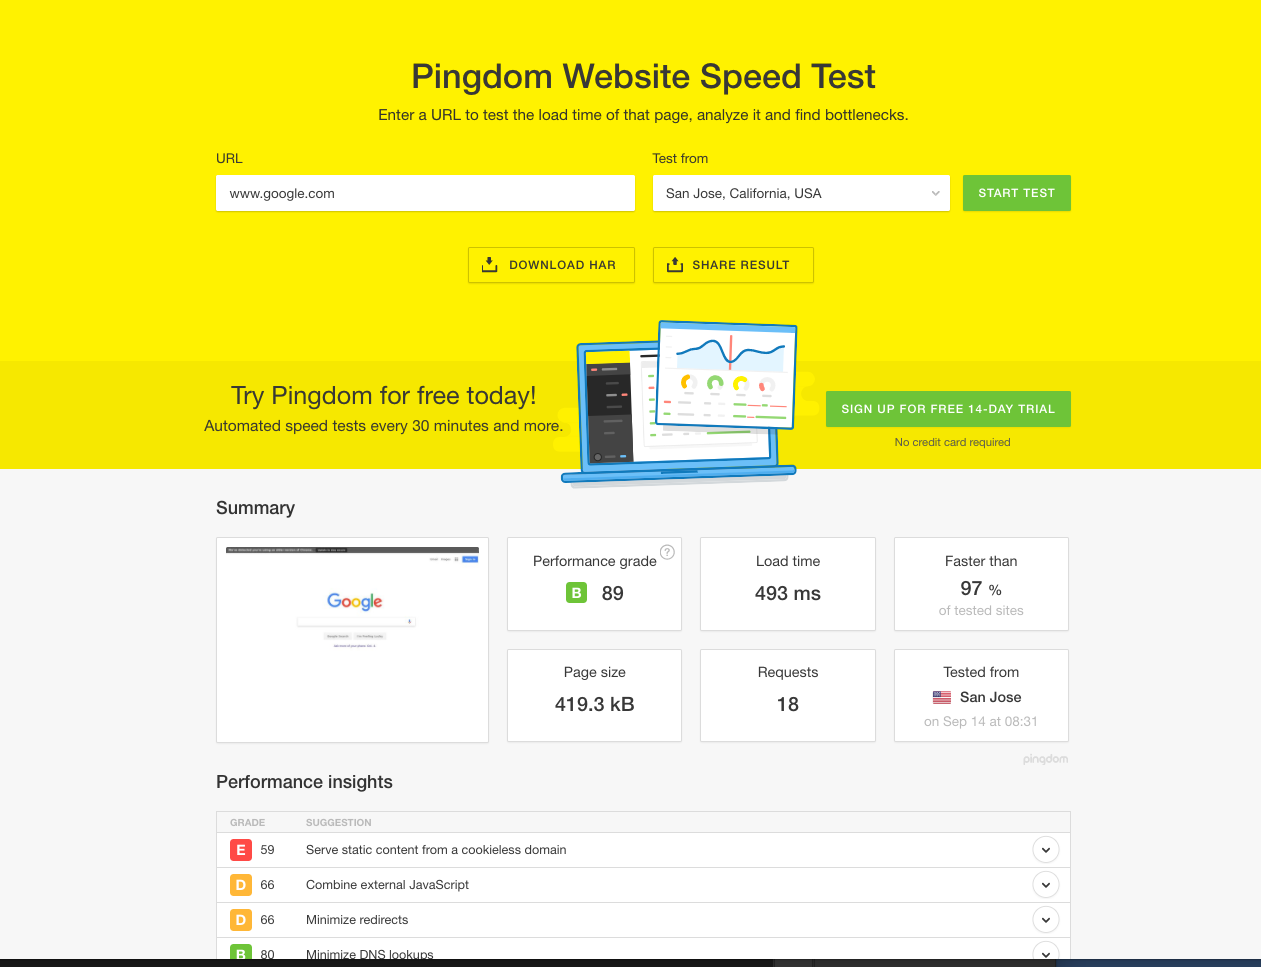 This SEO audit includes a Pingdom speed test